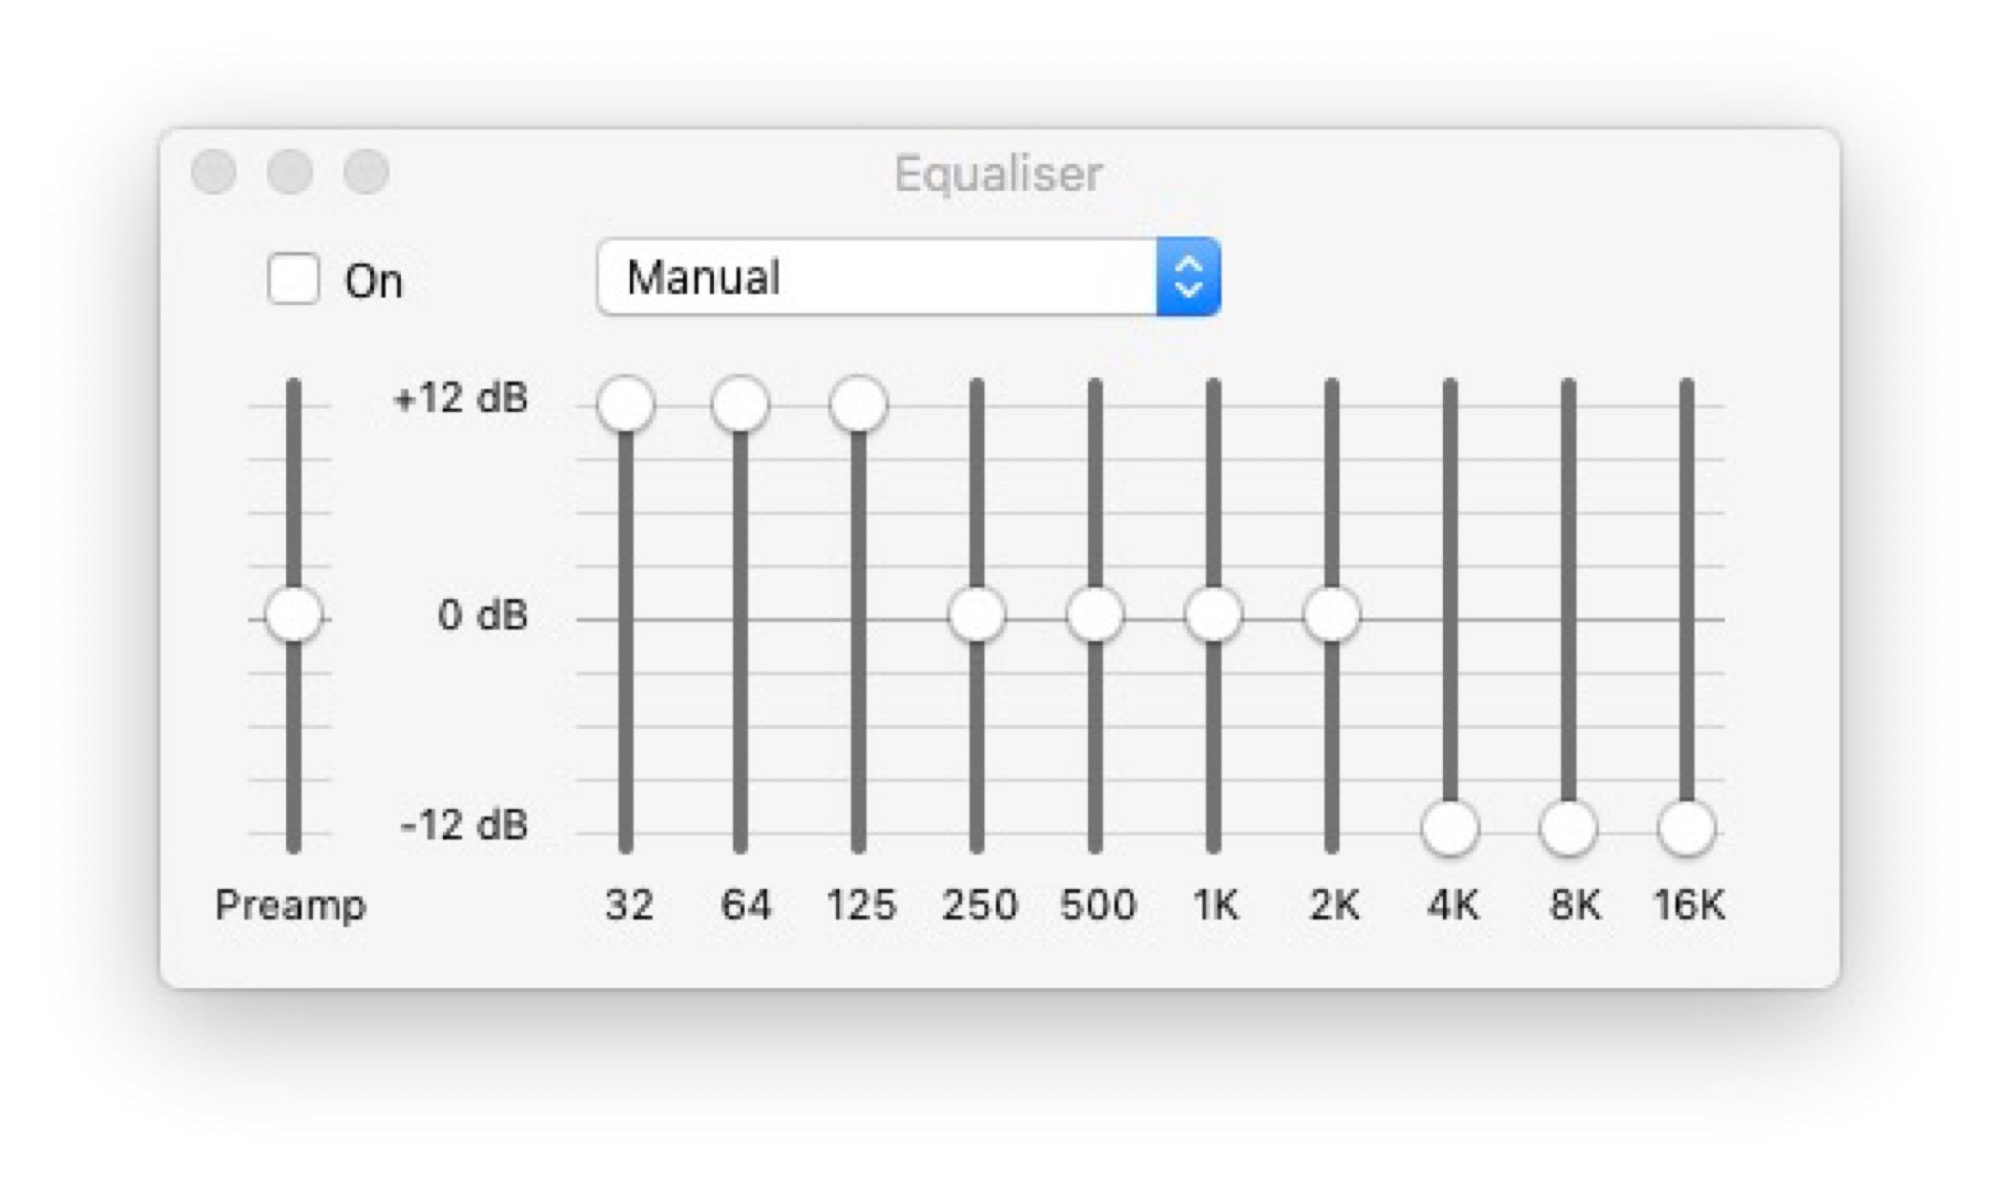 retort valgfri Men Should you use the EQ in the iPhone's Music app? | Cult of Mac